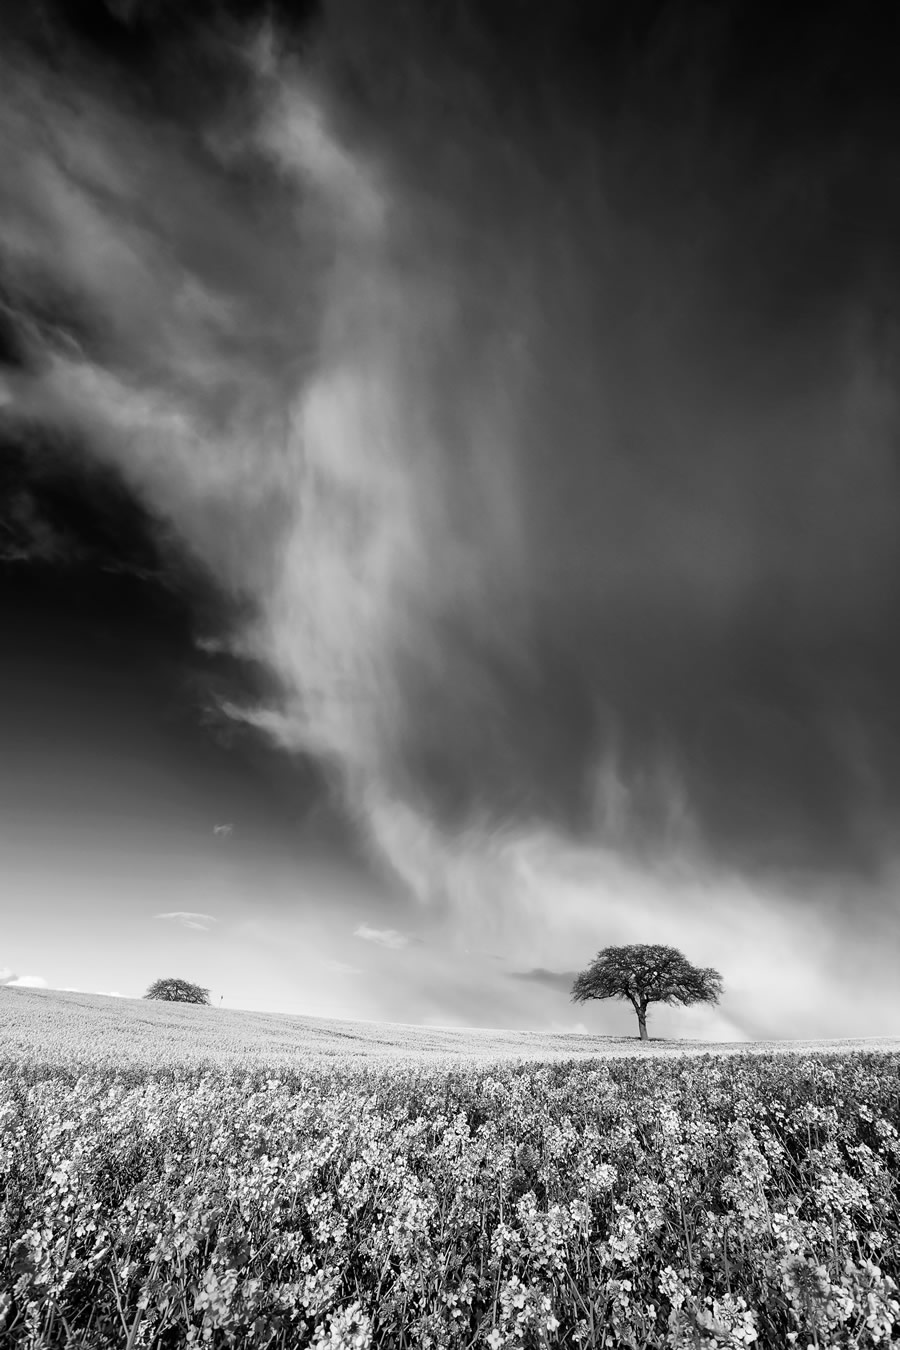 Expert 9th: ‘Passing Storm’ by Kathy Medcalf - Location: Nottinghamshire, England 